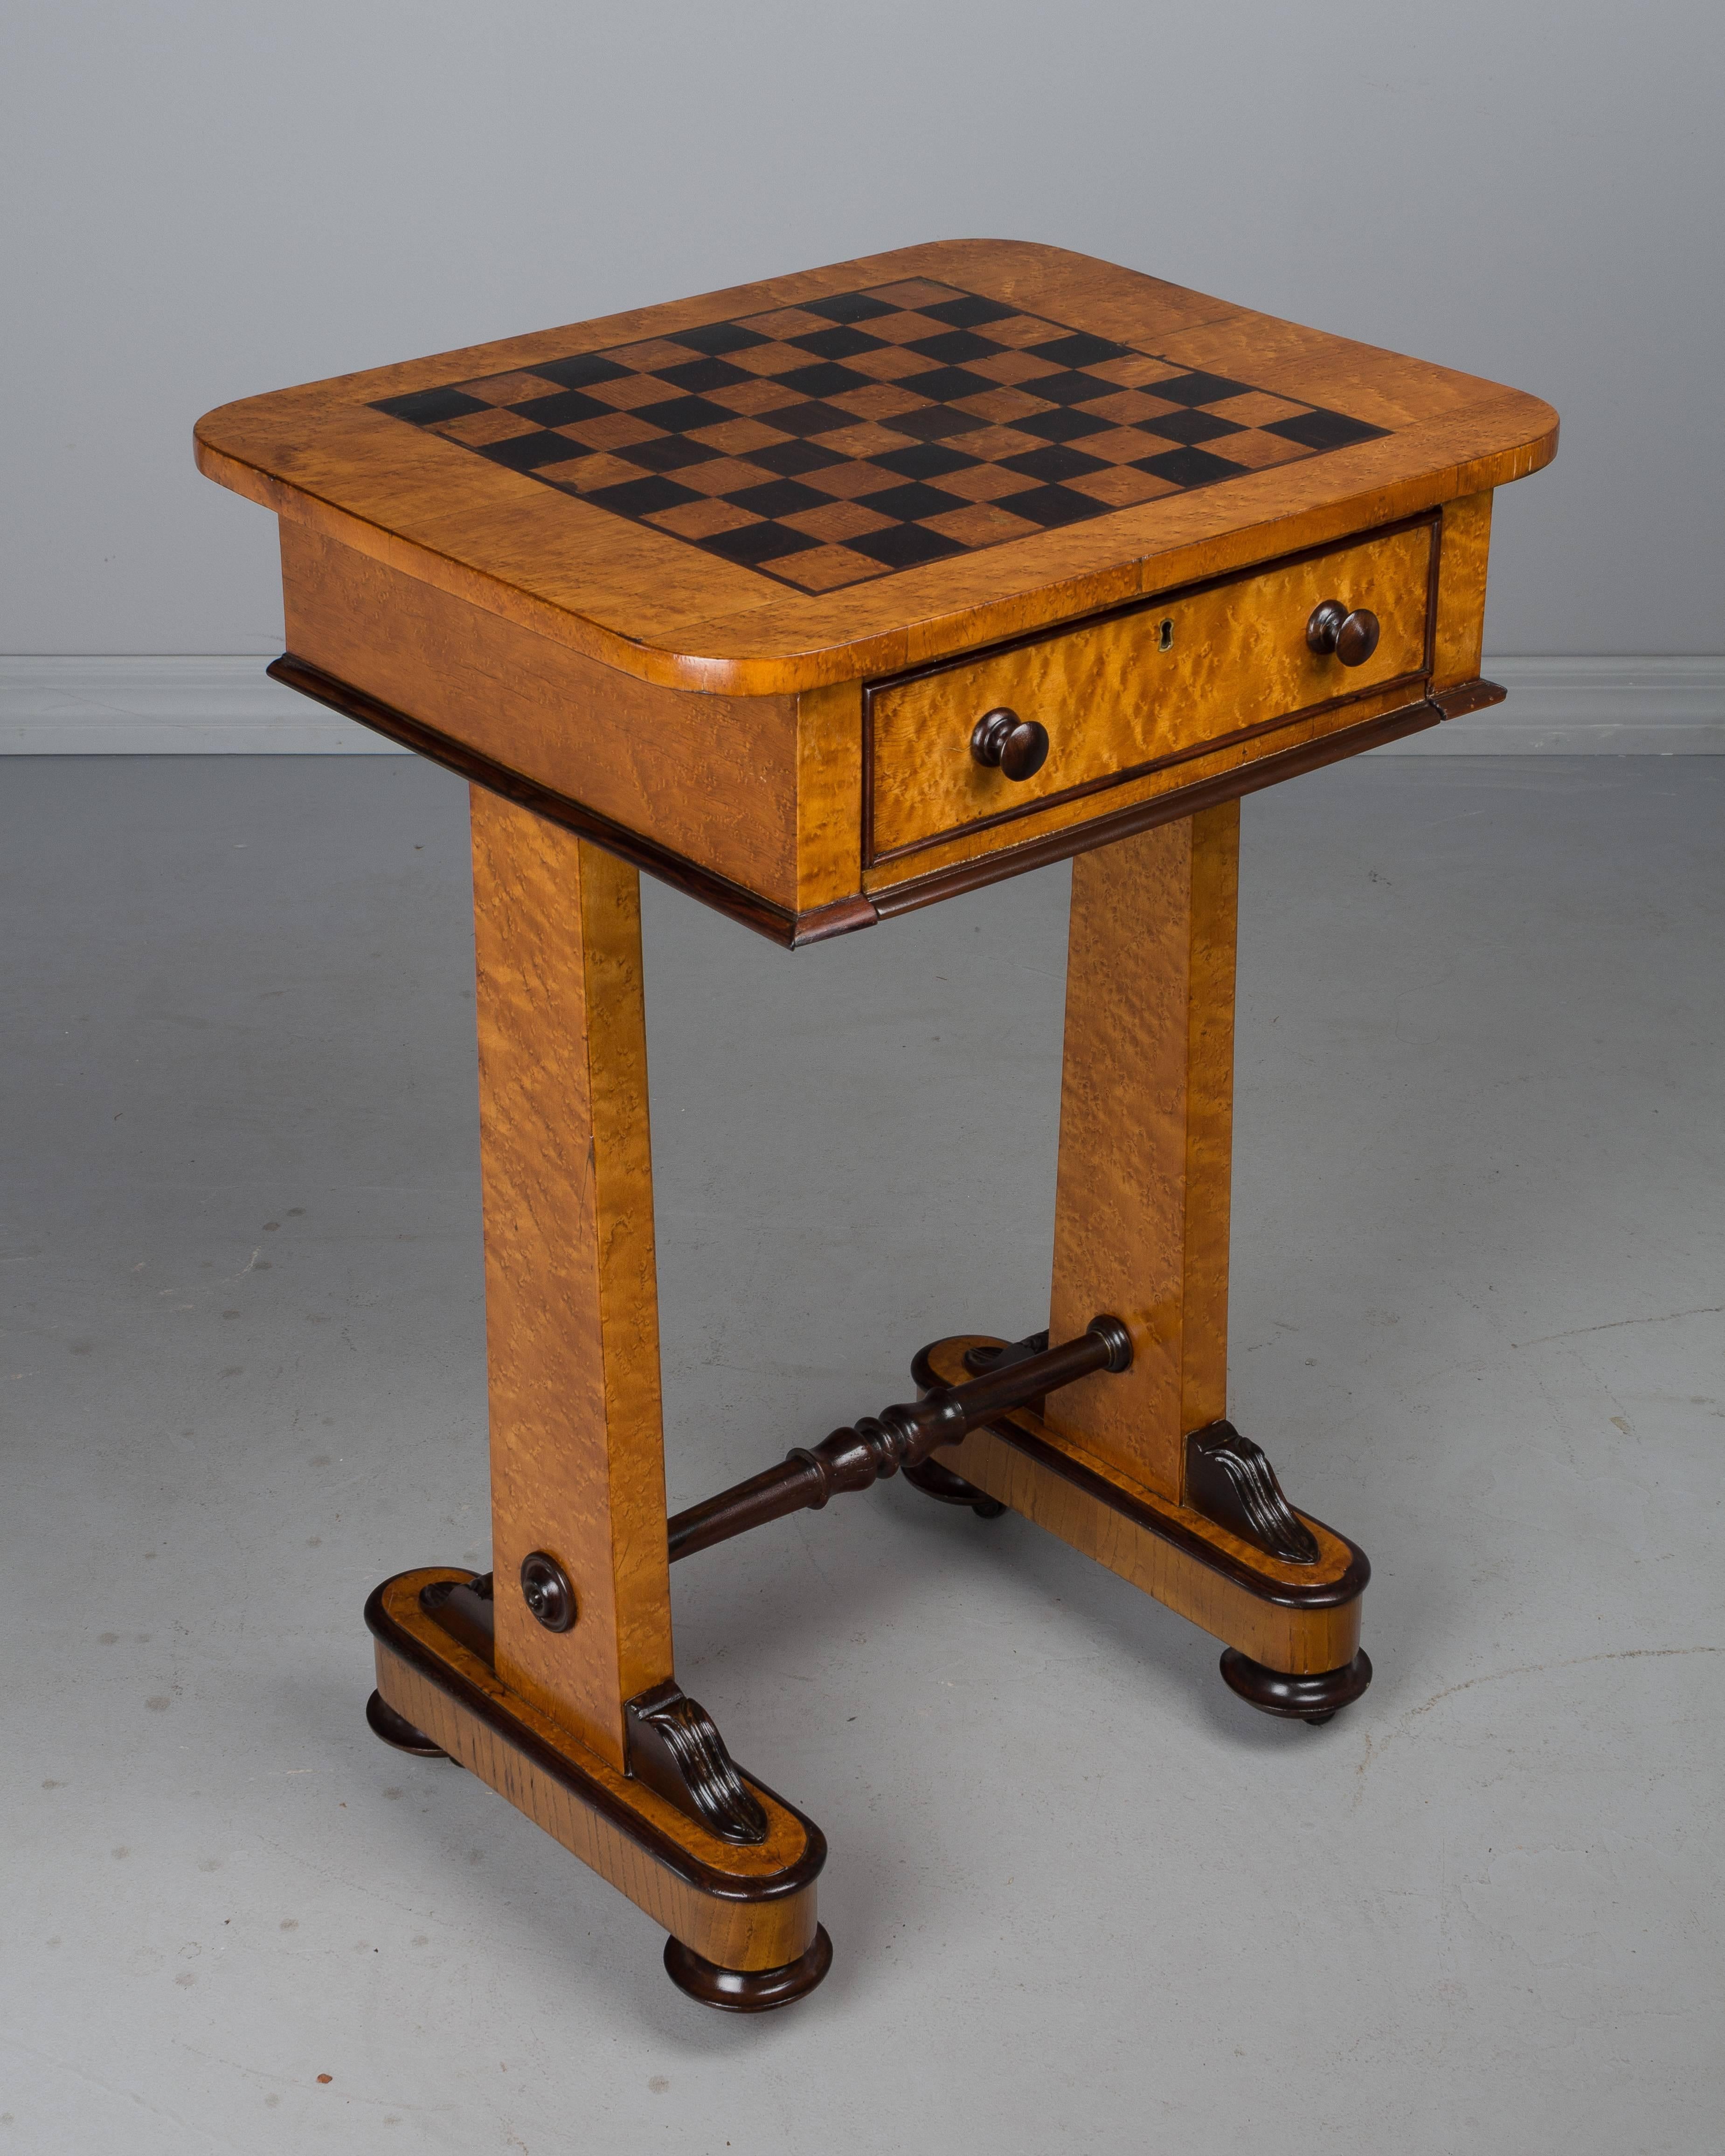 An 19th century English game table made of bird's-eye maple and rosewood with marquetry checkerboard playing surface. Finely crafted with a single dovetailed drawer and pull-out shelf, each lined with cream suede. Lock is present but there is no